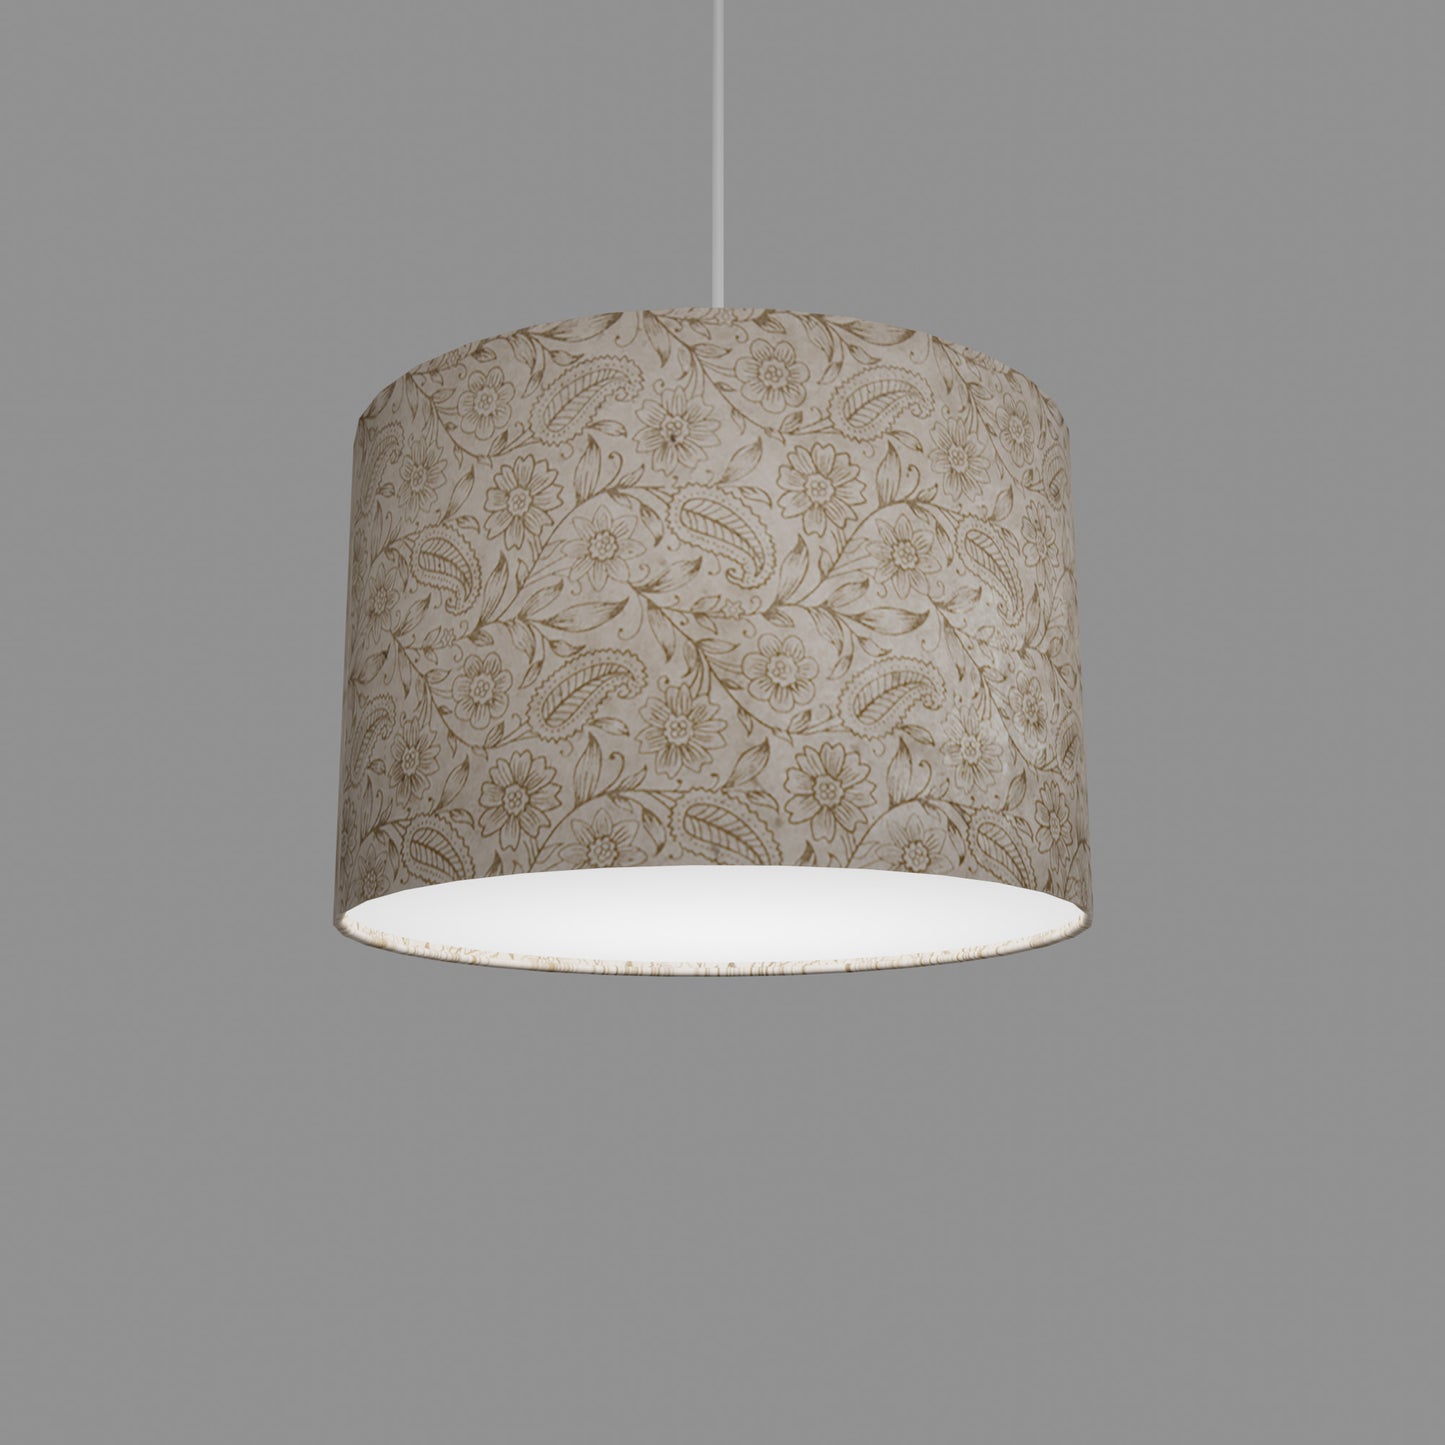 Drum Lamp Shade - P69 - Garden Gold on Natural, 30cm(d) x 20cm(h)